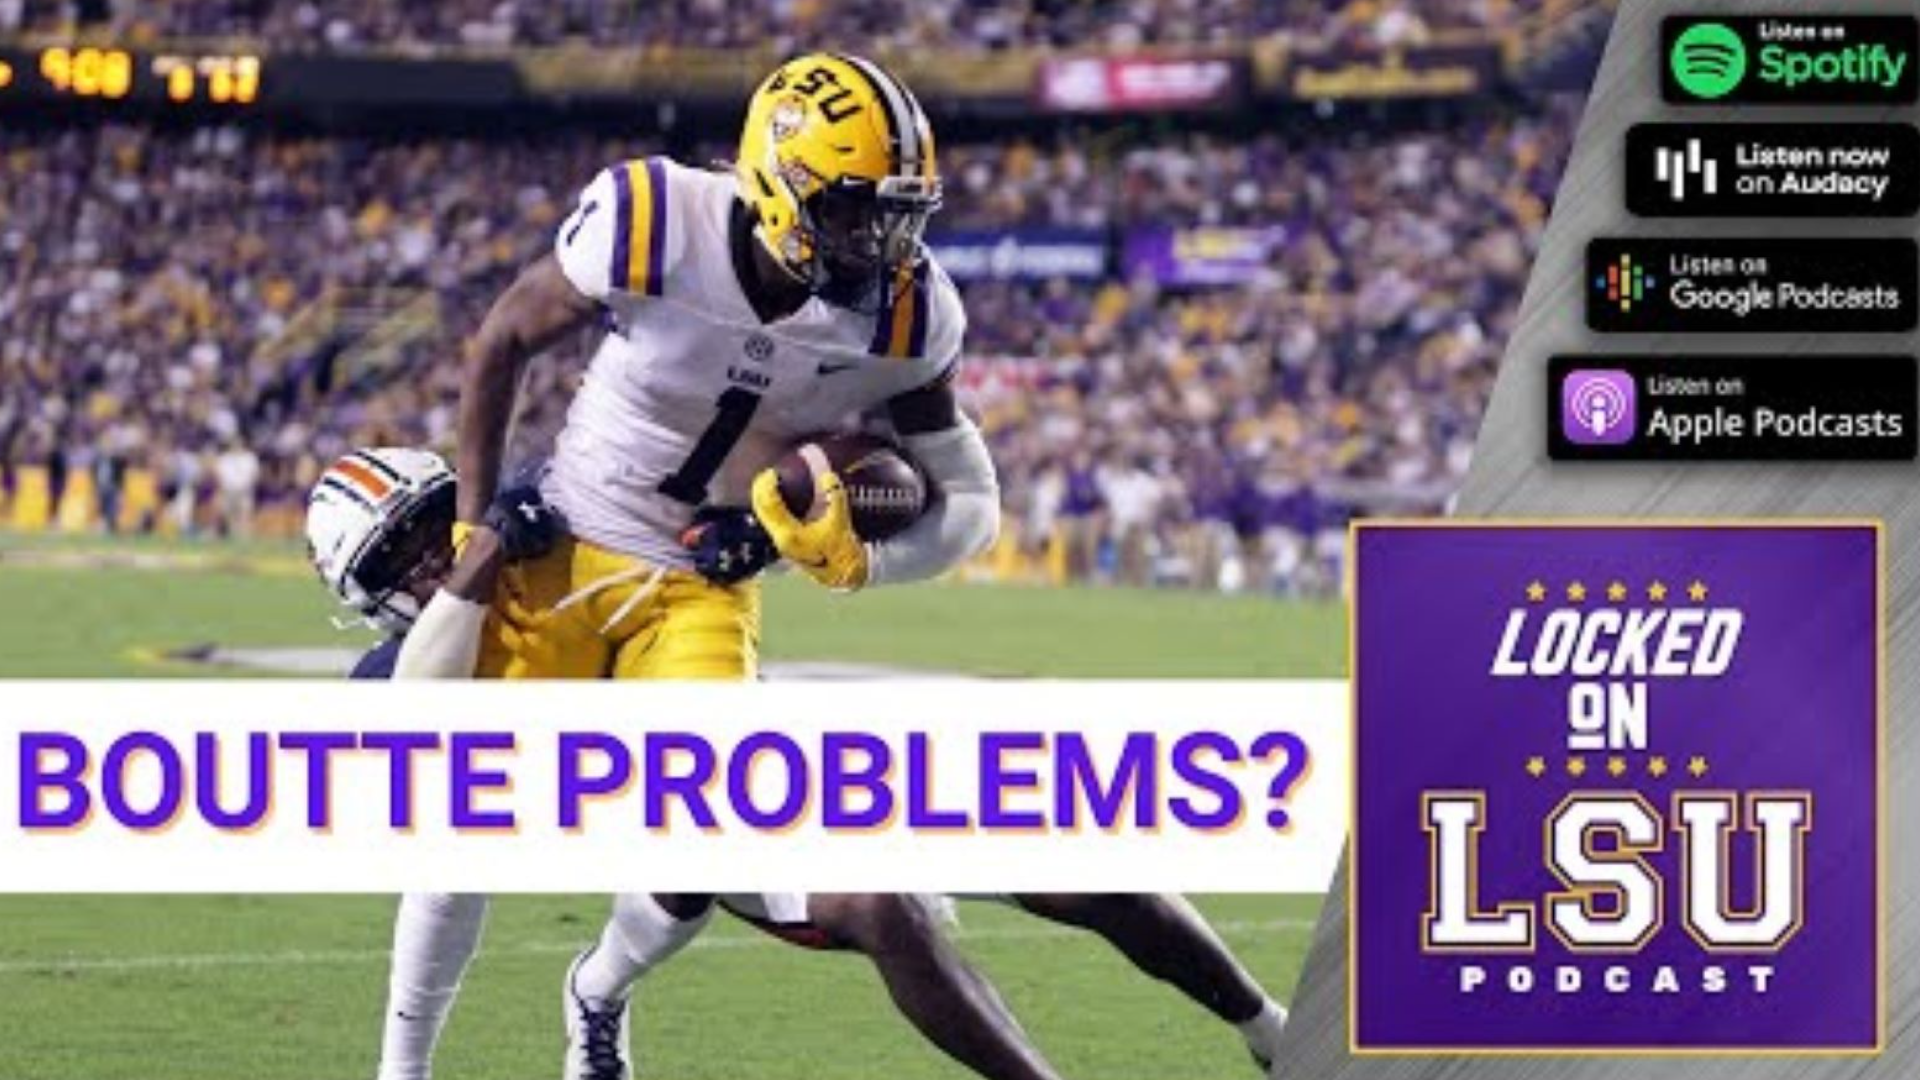 There was a good bit of bad in LSU's gutwrenching loss to Florida State on Sunday night, but there was also some good to take away to make you feel better about the